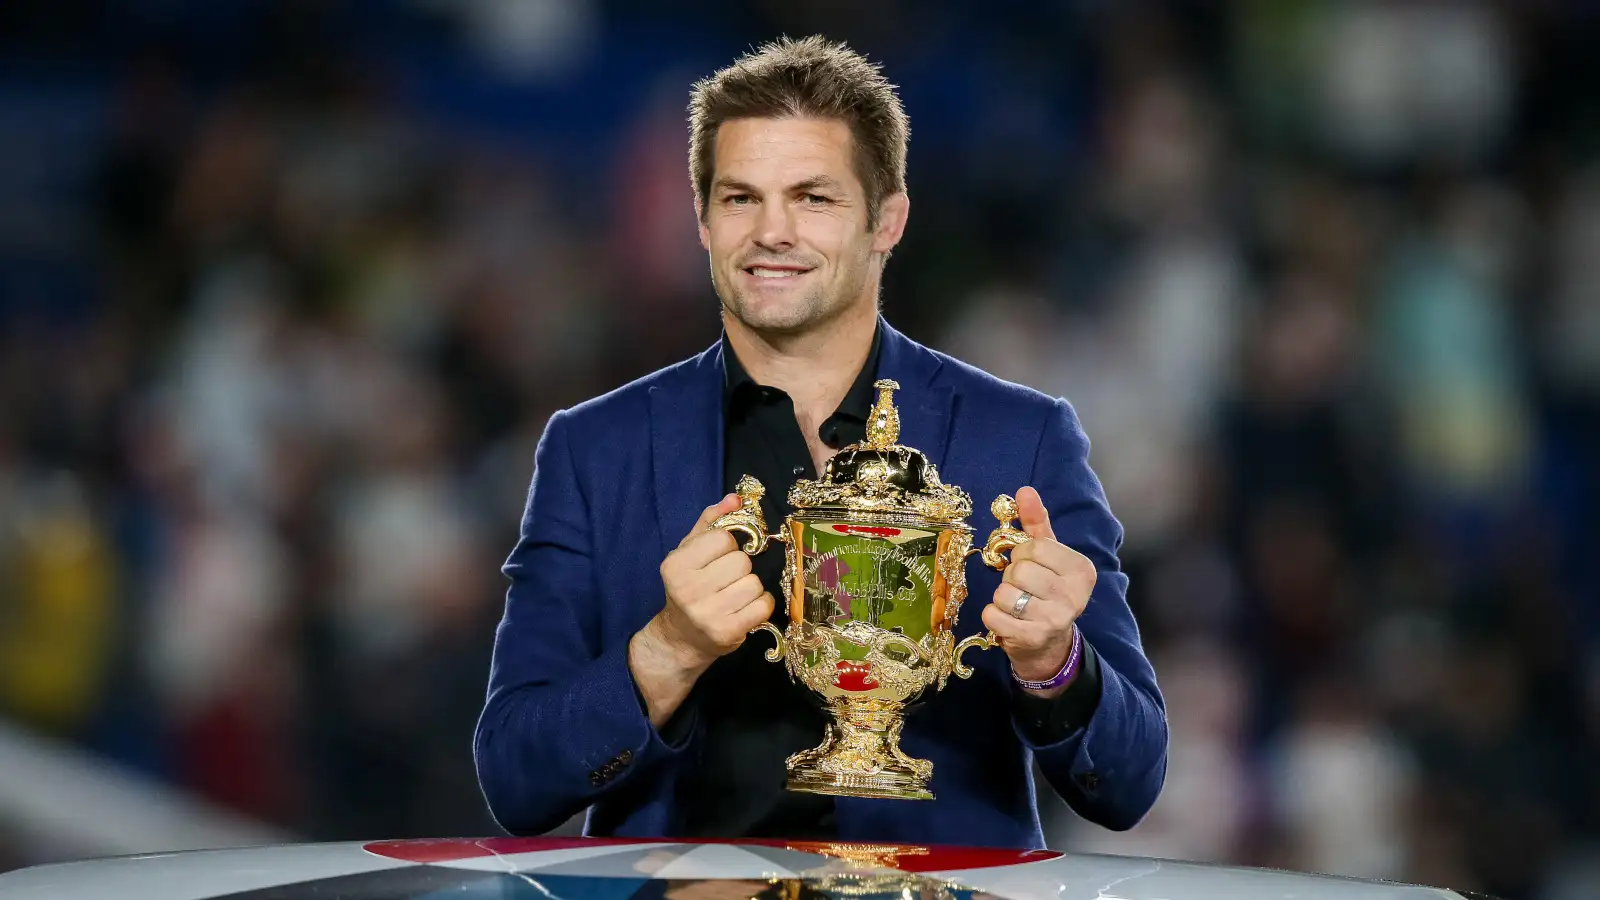 Former All Blacks captain Richie McCaw holds the Rugby World Cup trophy.